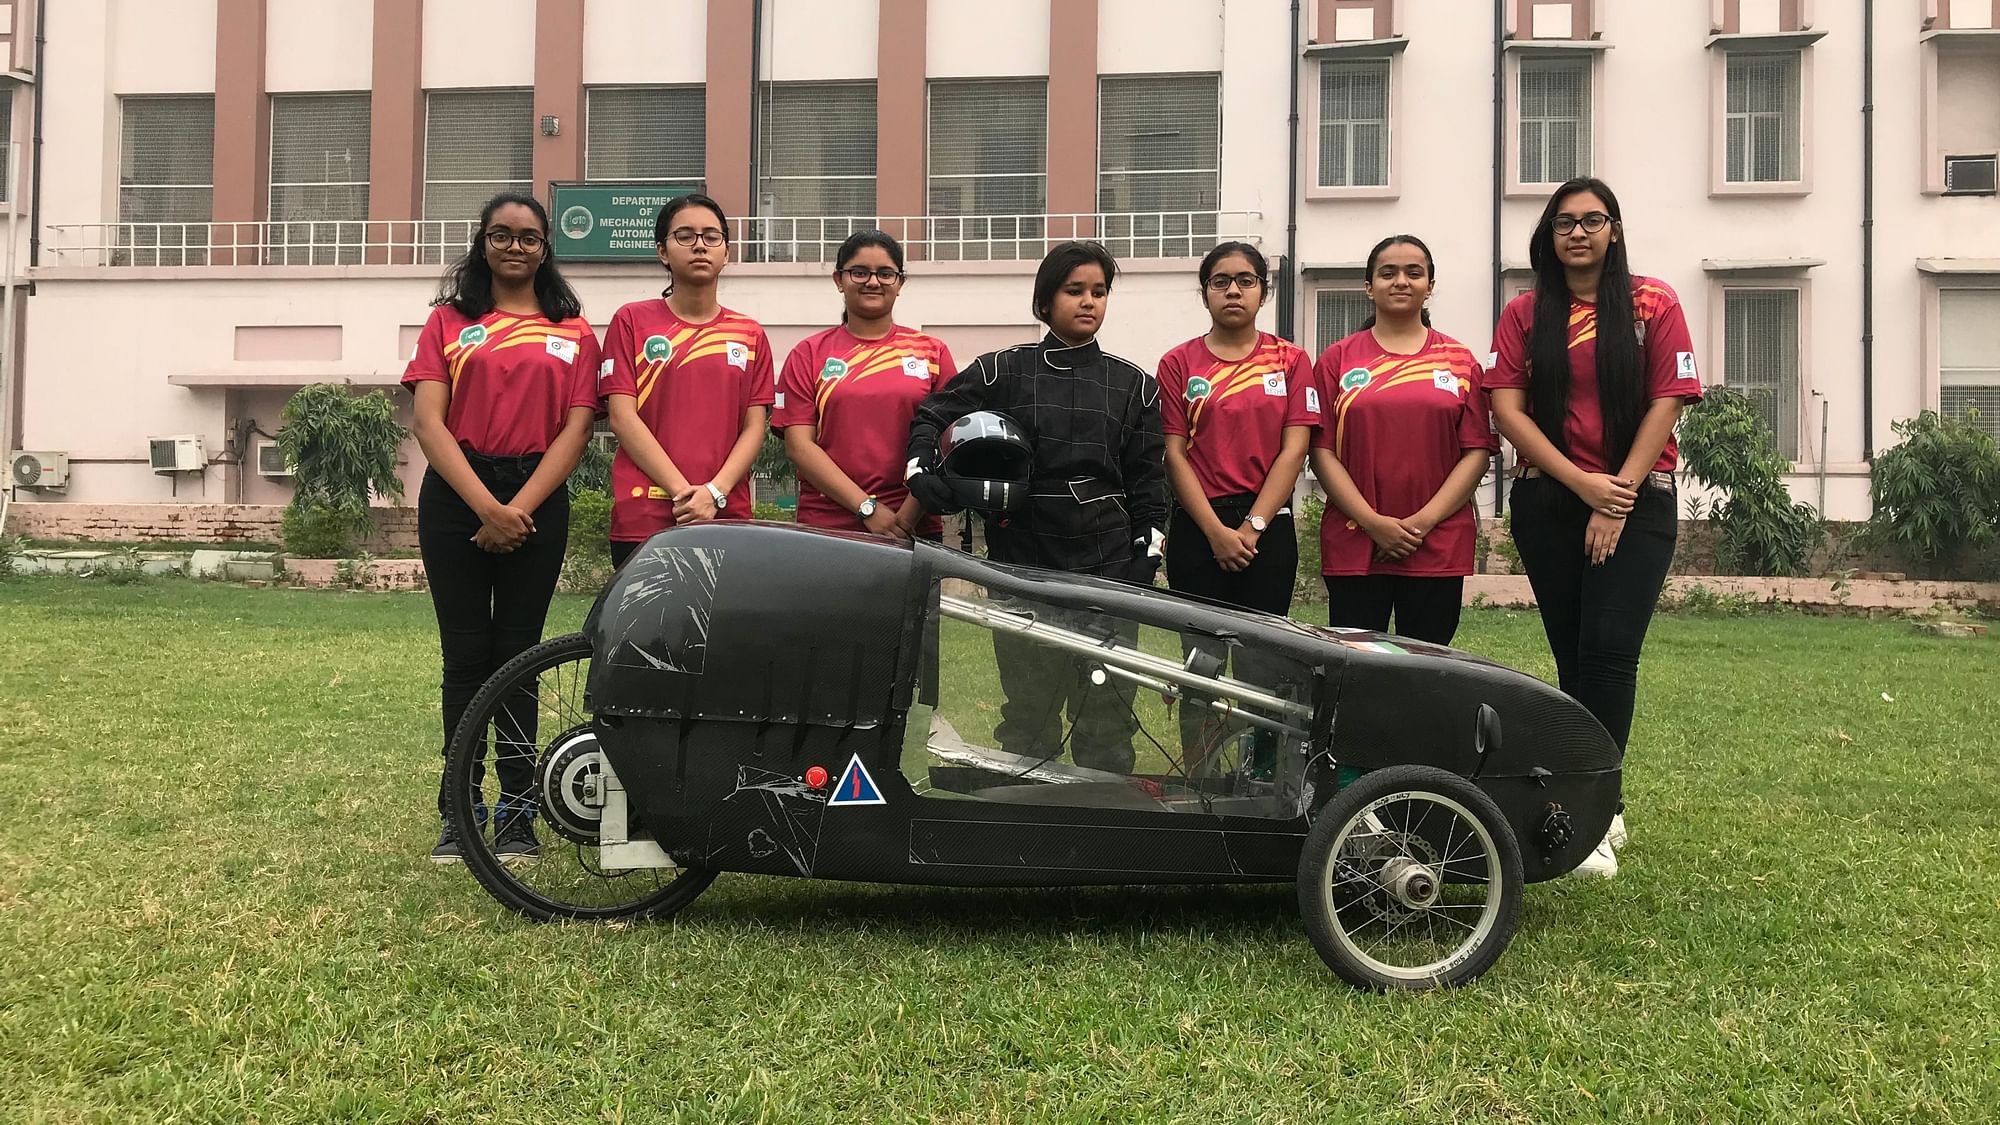 Students of Indira Gandhi Delhi Technical University for Women with their electric car that claims to do 250 Km on one unit of electricity.